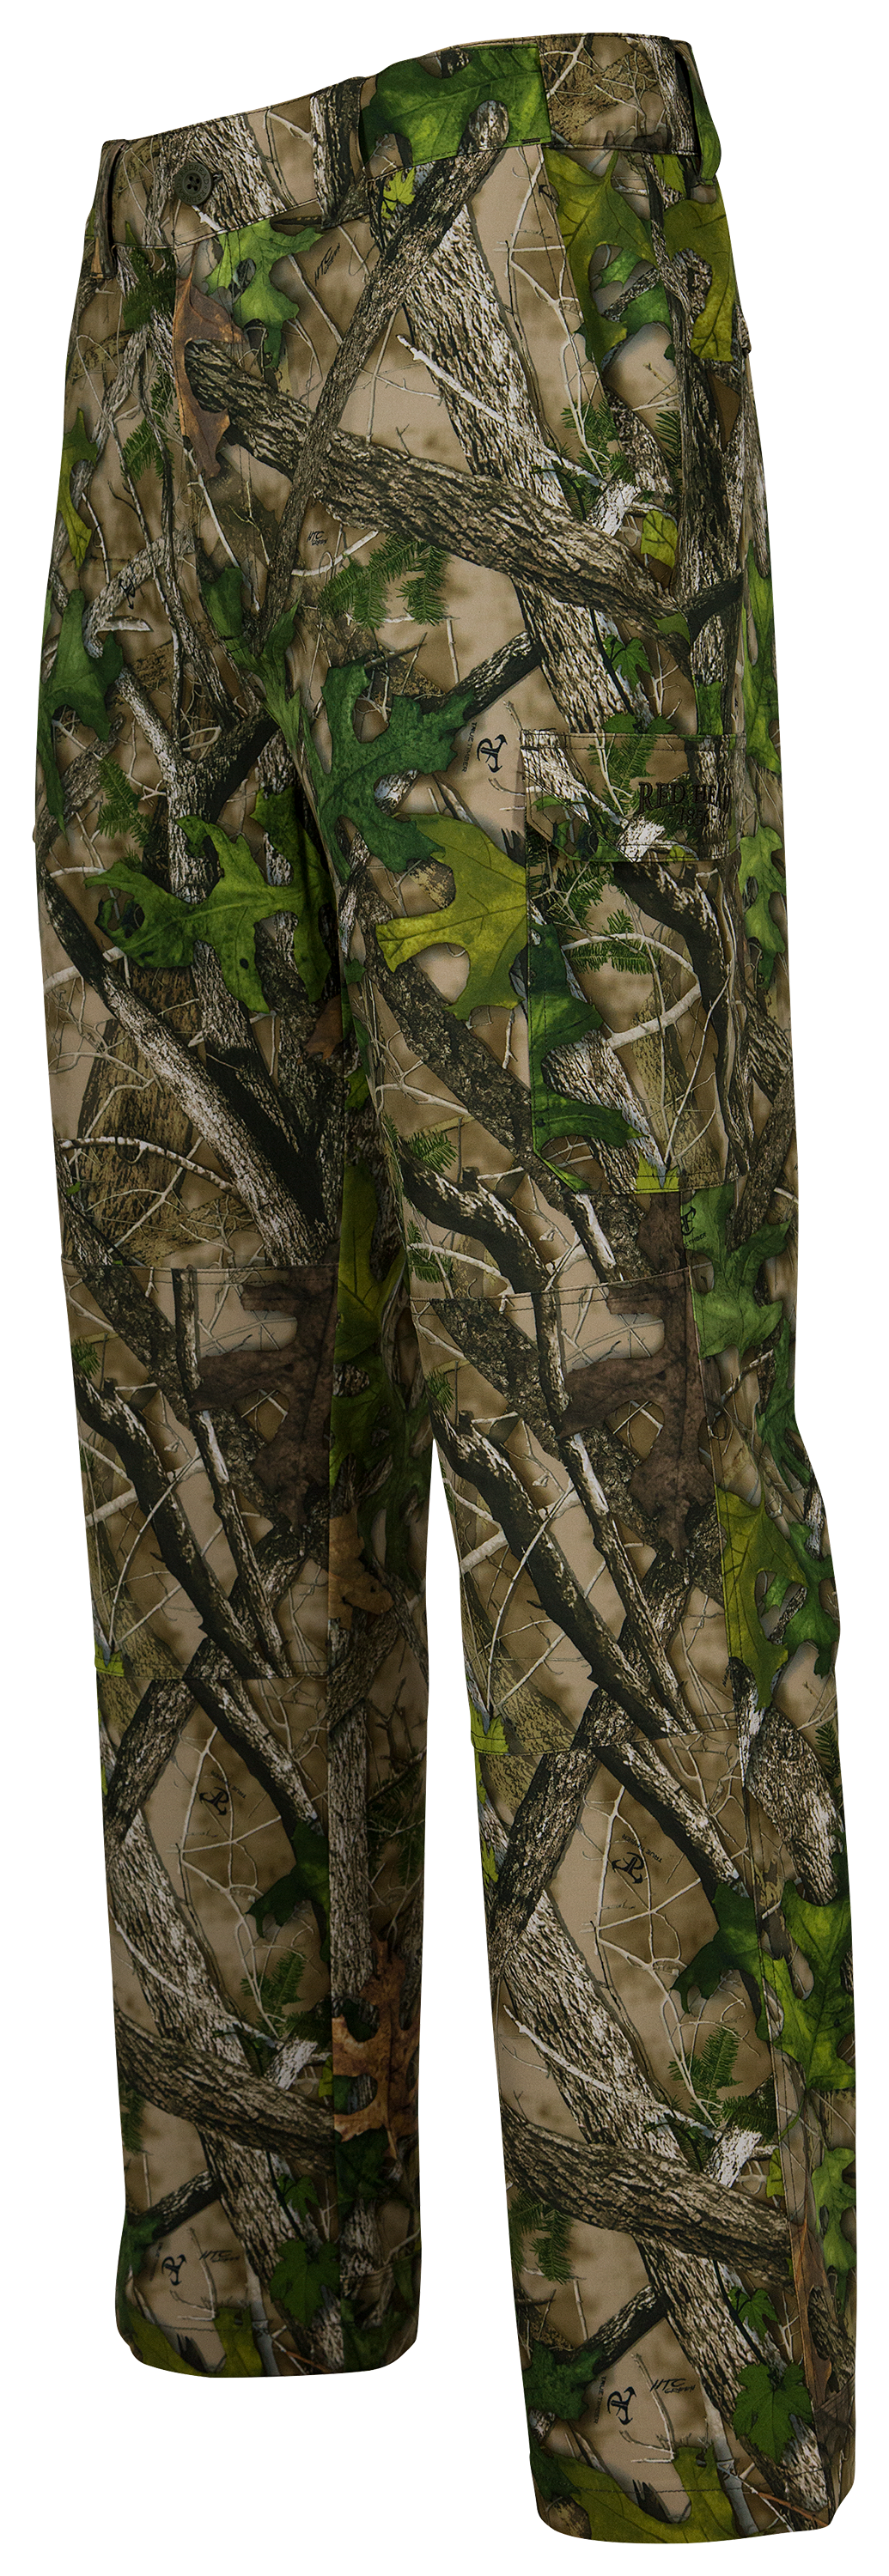 RedHead Tec-Lite Pants for Men with Insect Shield - TrueTimber HTC Green - M